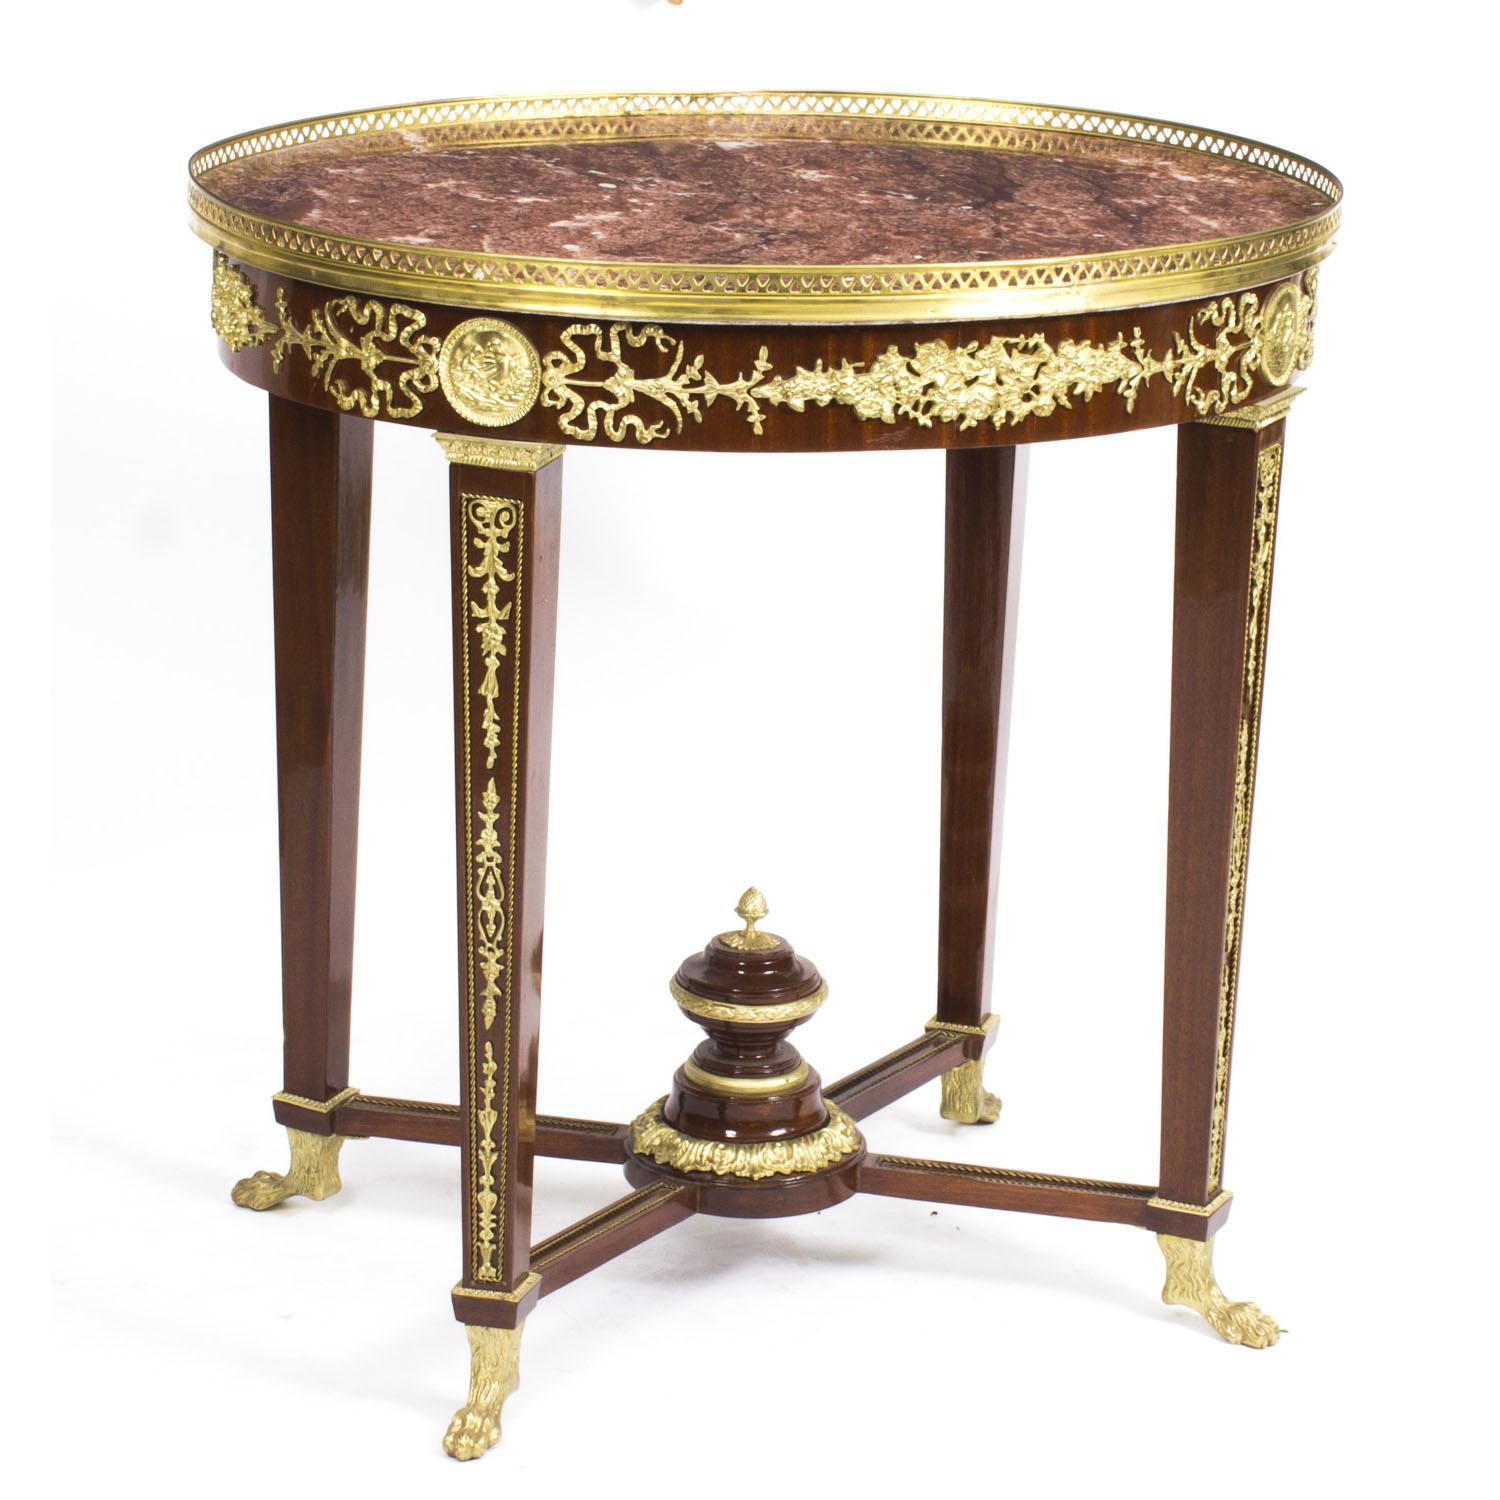 Vintage Empire Revival Marble Top Ormolu Mounted Occasional Table 20th C For Sale 12